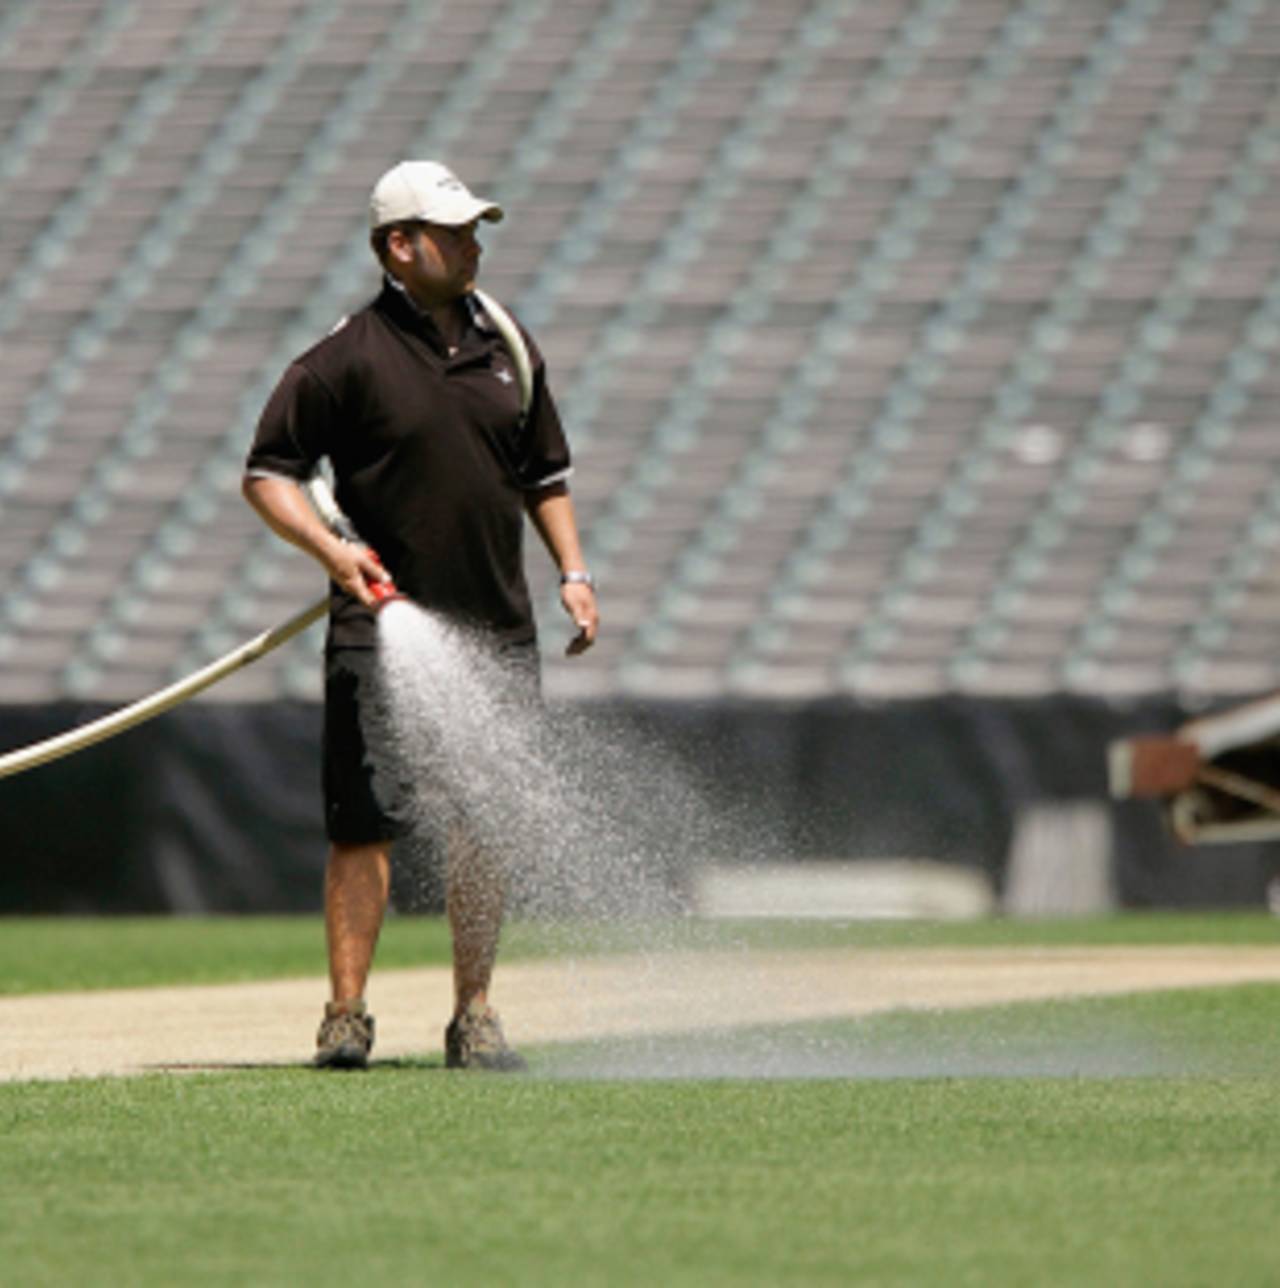 A groundsman waters the field during pitch preparations, Eden Park, Auckland, December 1, 2005